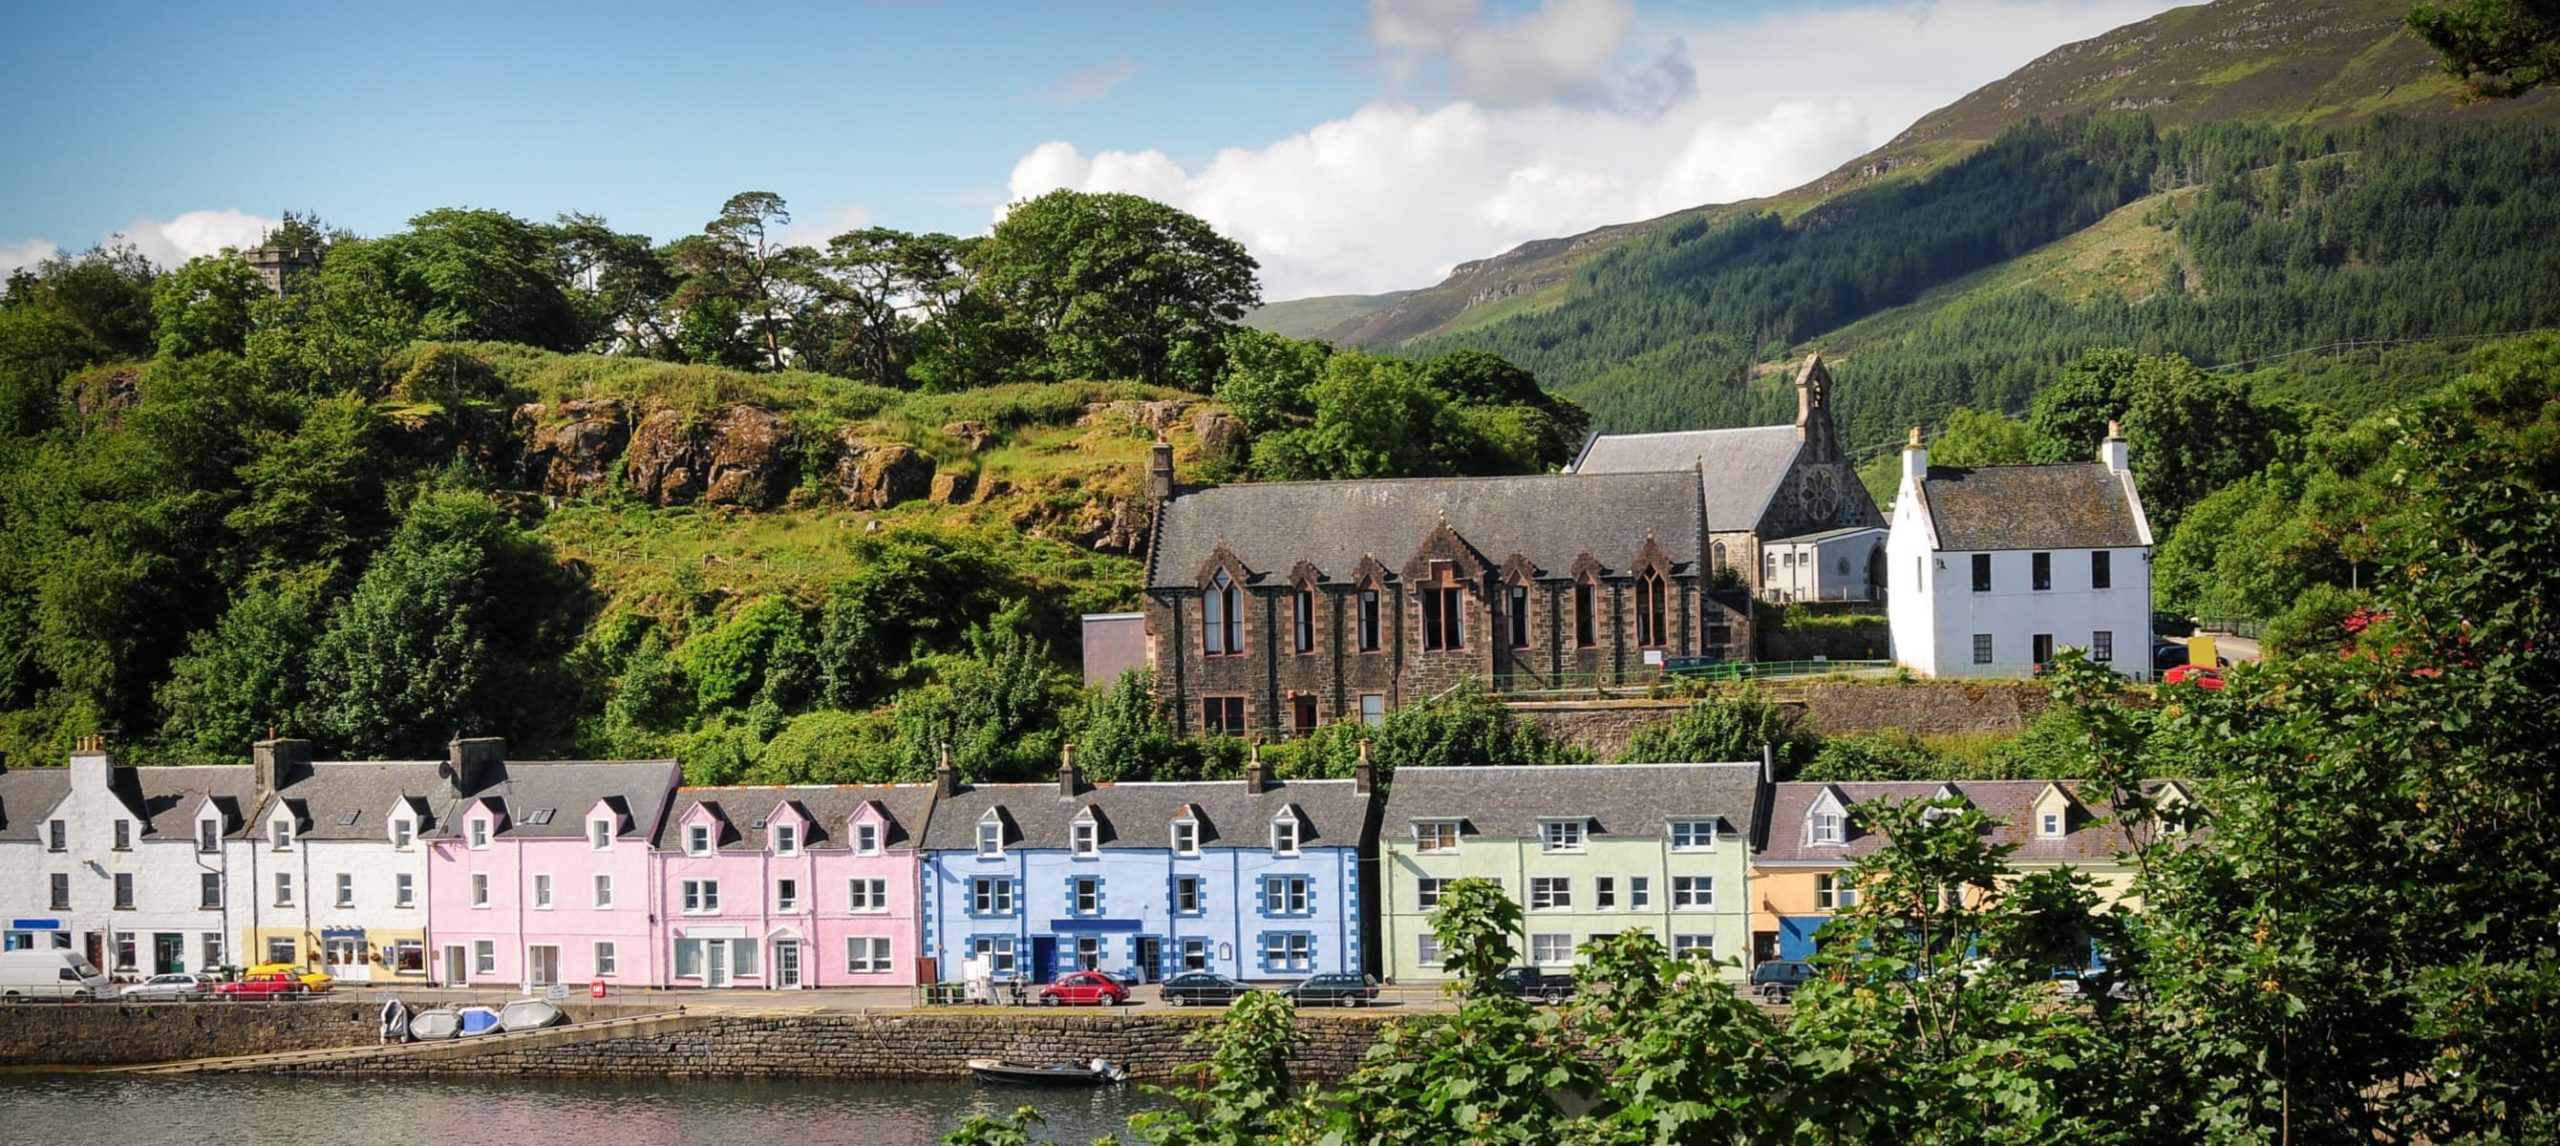 Image of the harbour of Portree in the Isle of Skie in Scotland.